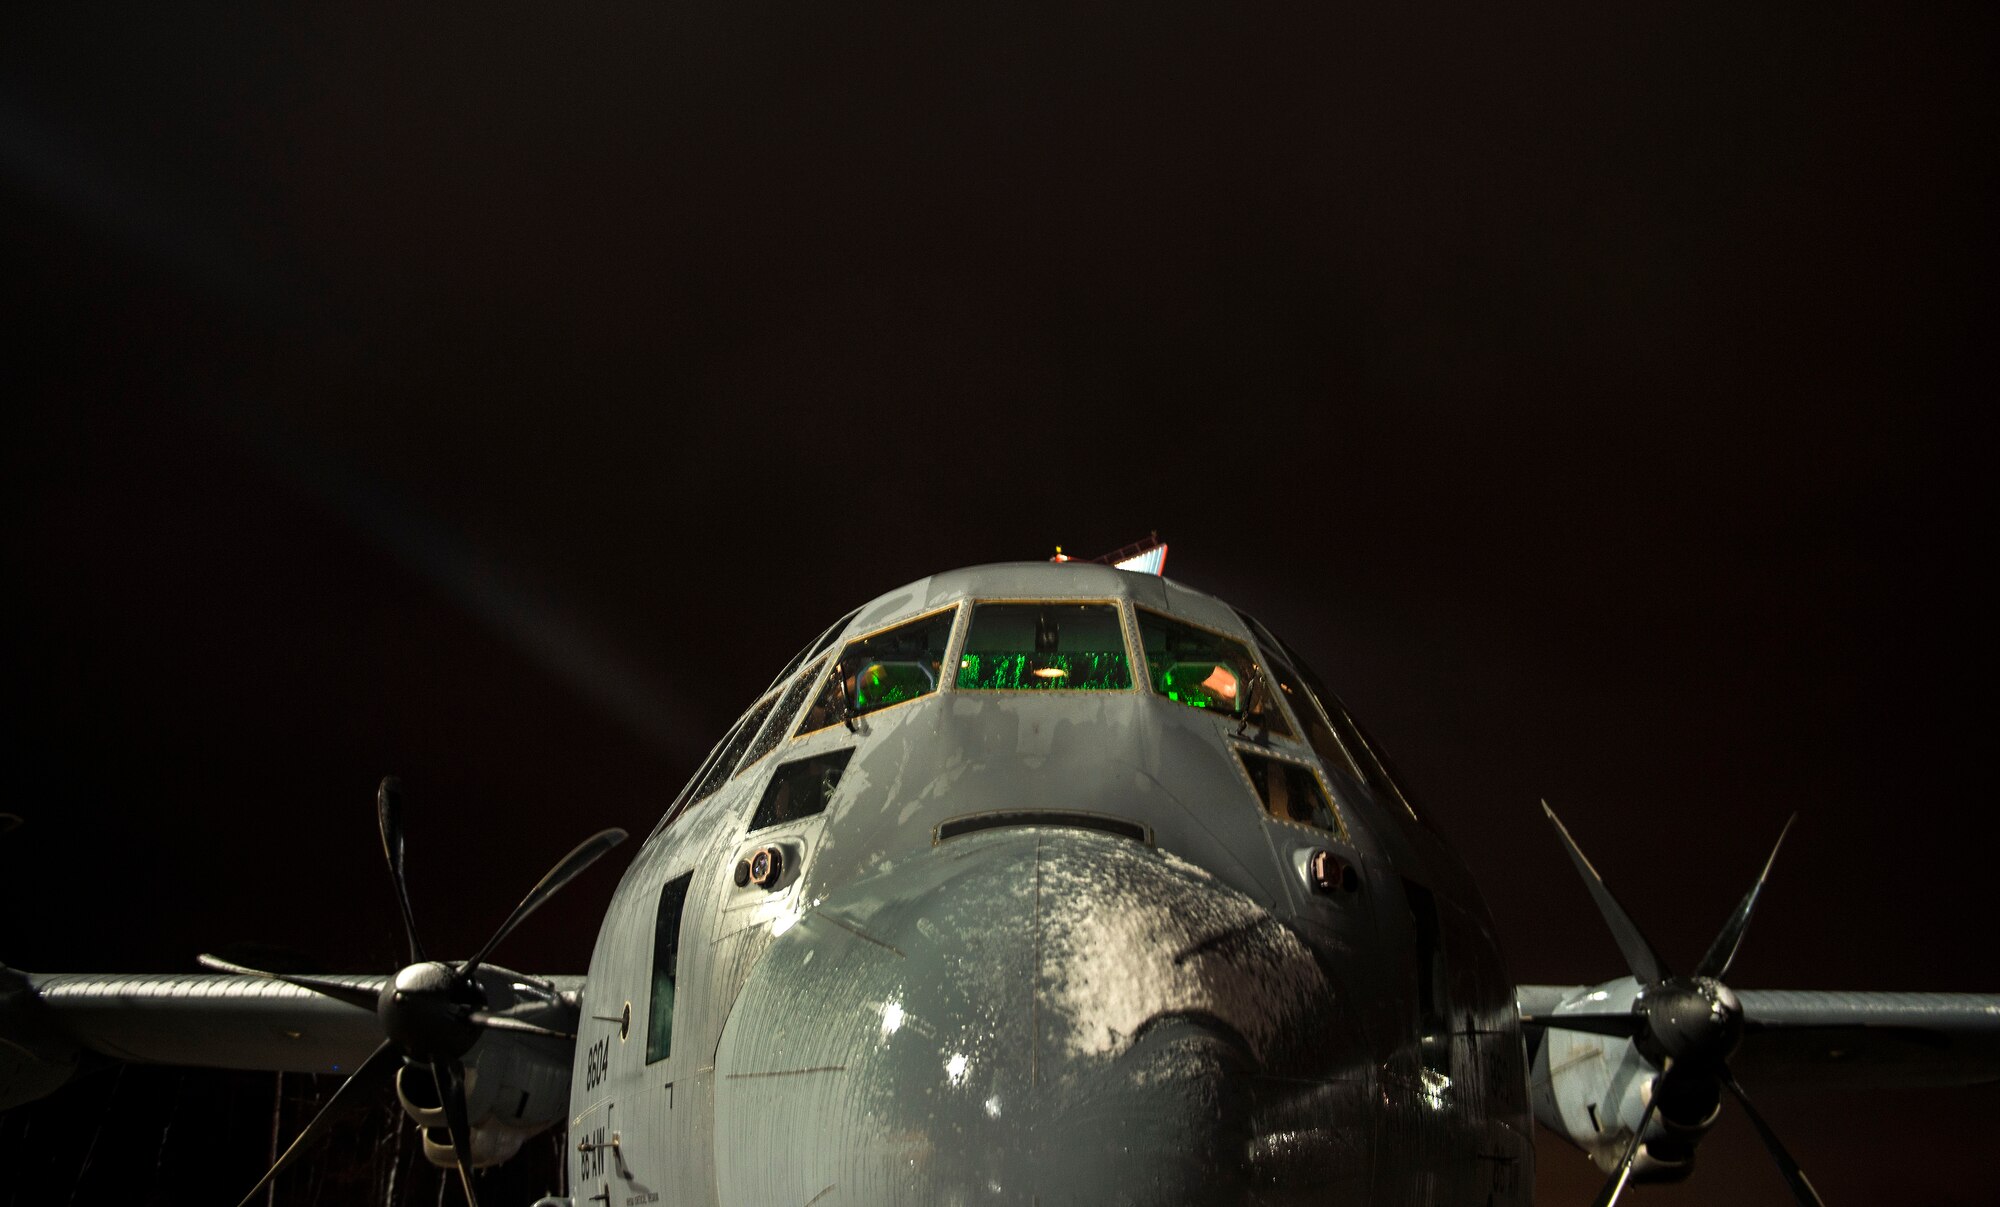 A C-130J Super Hercules from the 37th Airlift Squadron is prepped before a training exercise at Ramstein Air Base, Germany, Nov. 25, 2015. Aircrew members spent more than 7 hours to prepare and fly to perform air drop training over U.S. Army Garrison Grafenwoehr, Germany. (U.S. Air Force photo/Staff Sgt. Sara Keller)